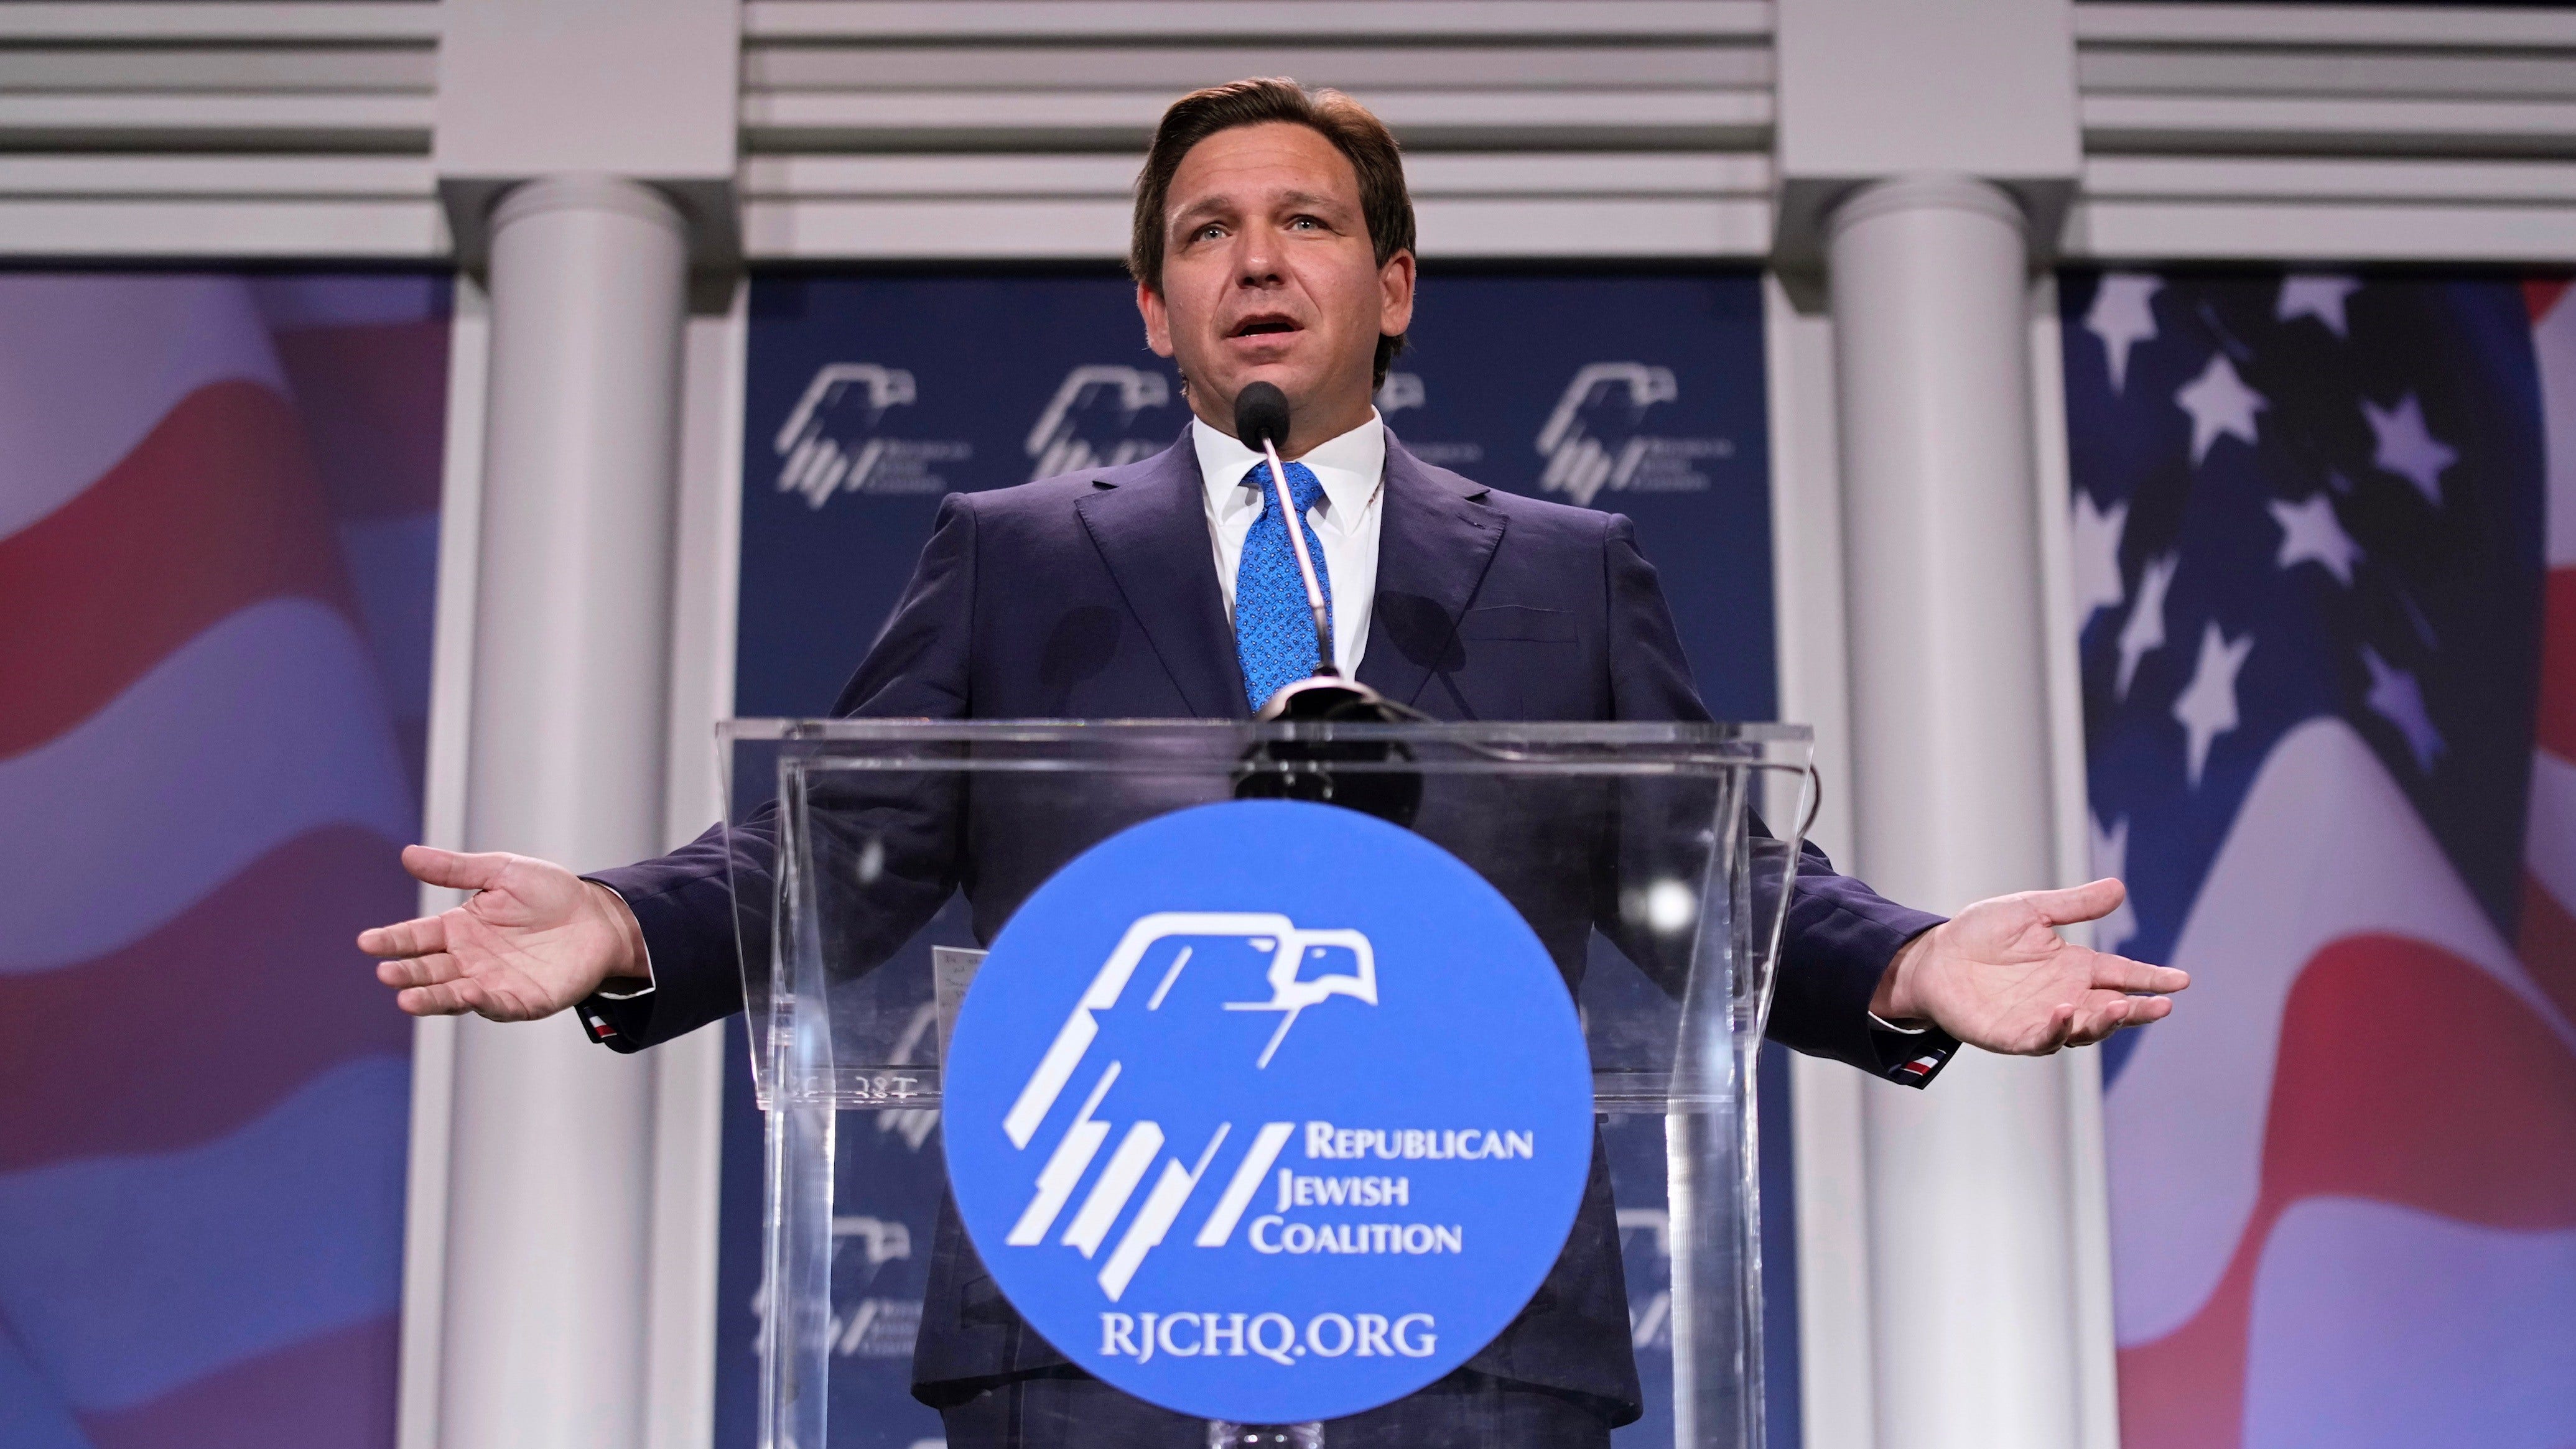 2024 Watch: DeSantis to huddle with top donors following landslide re-election victory